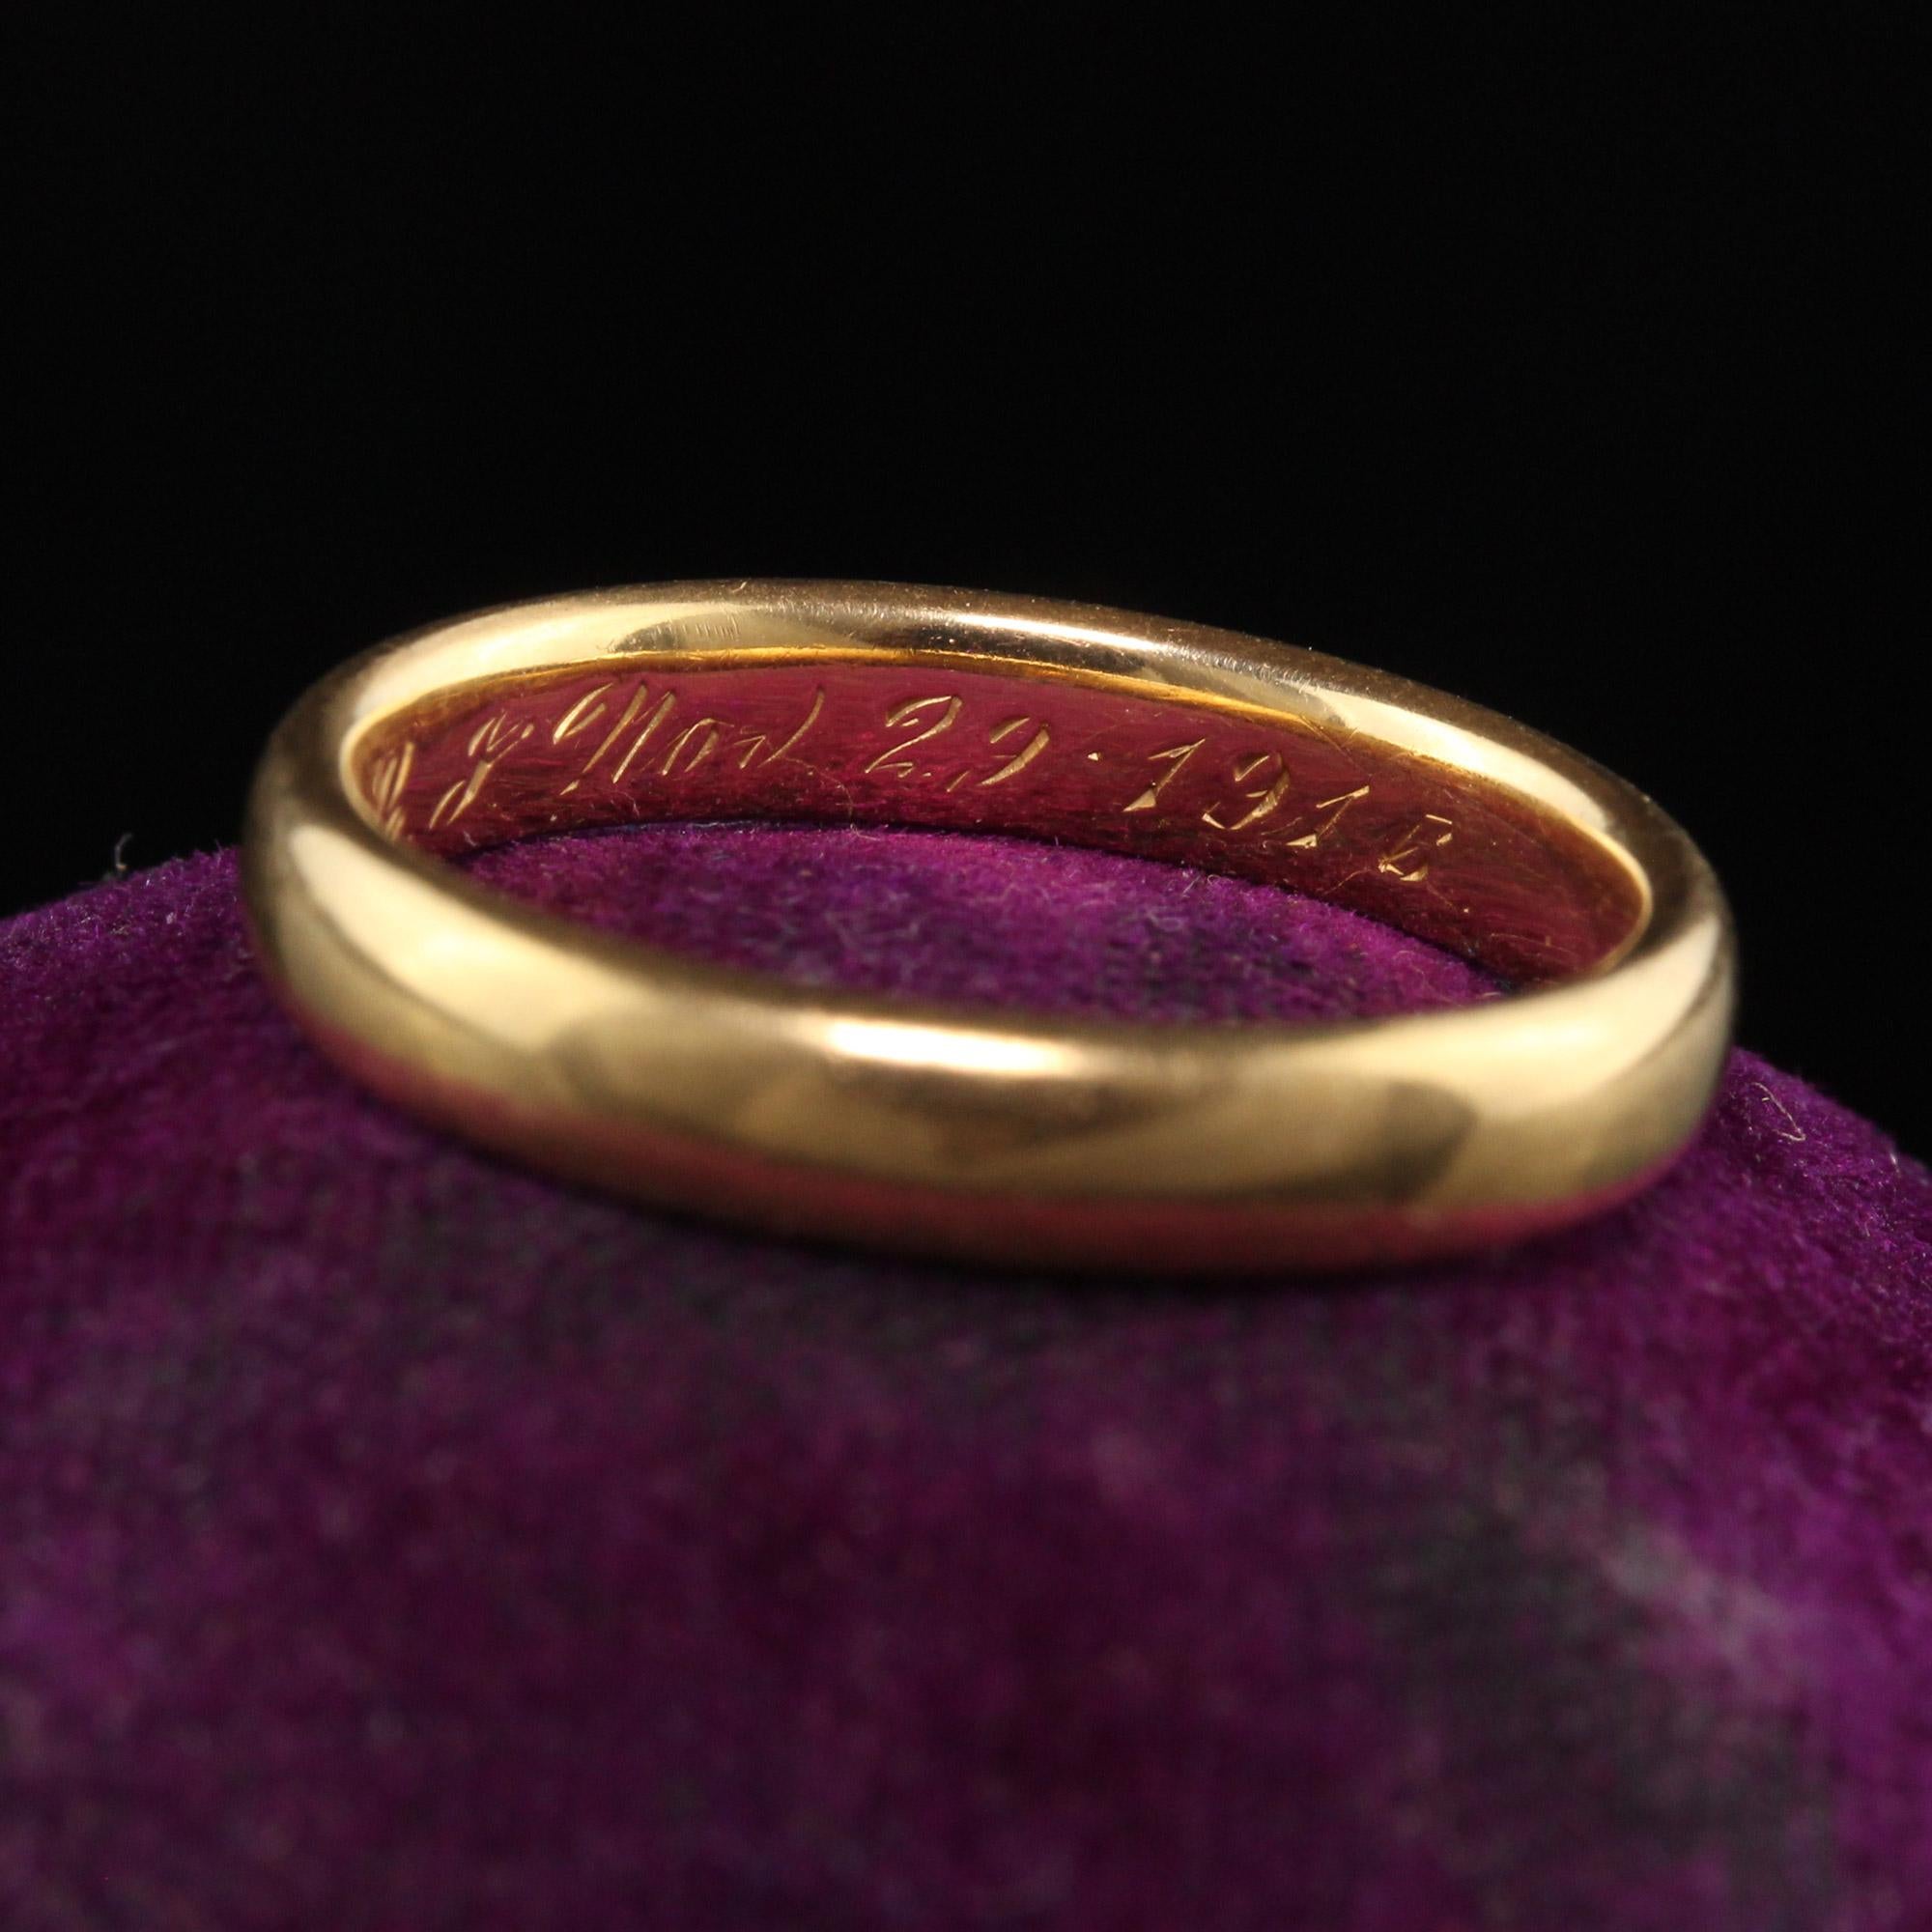 Antique Art Deco 18K Yellow Gold Engraved Wedding Band In Good Condition For Sale In Great Neck, NY